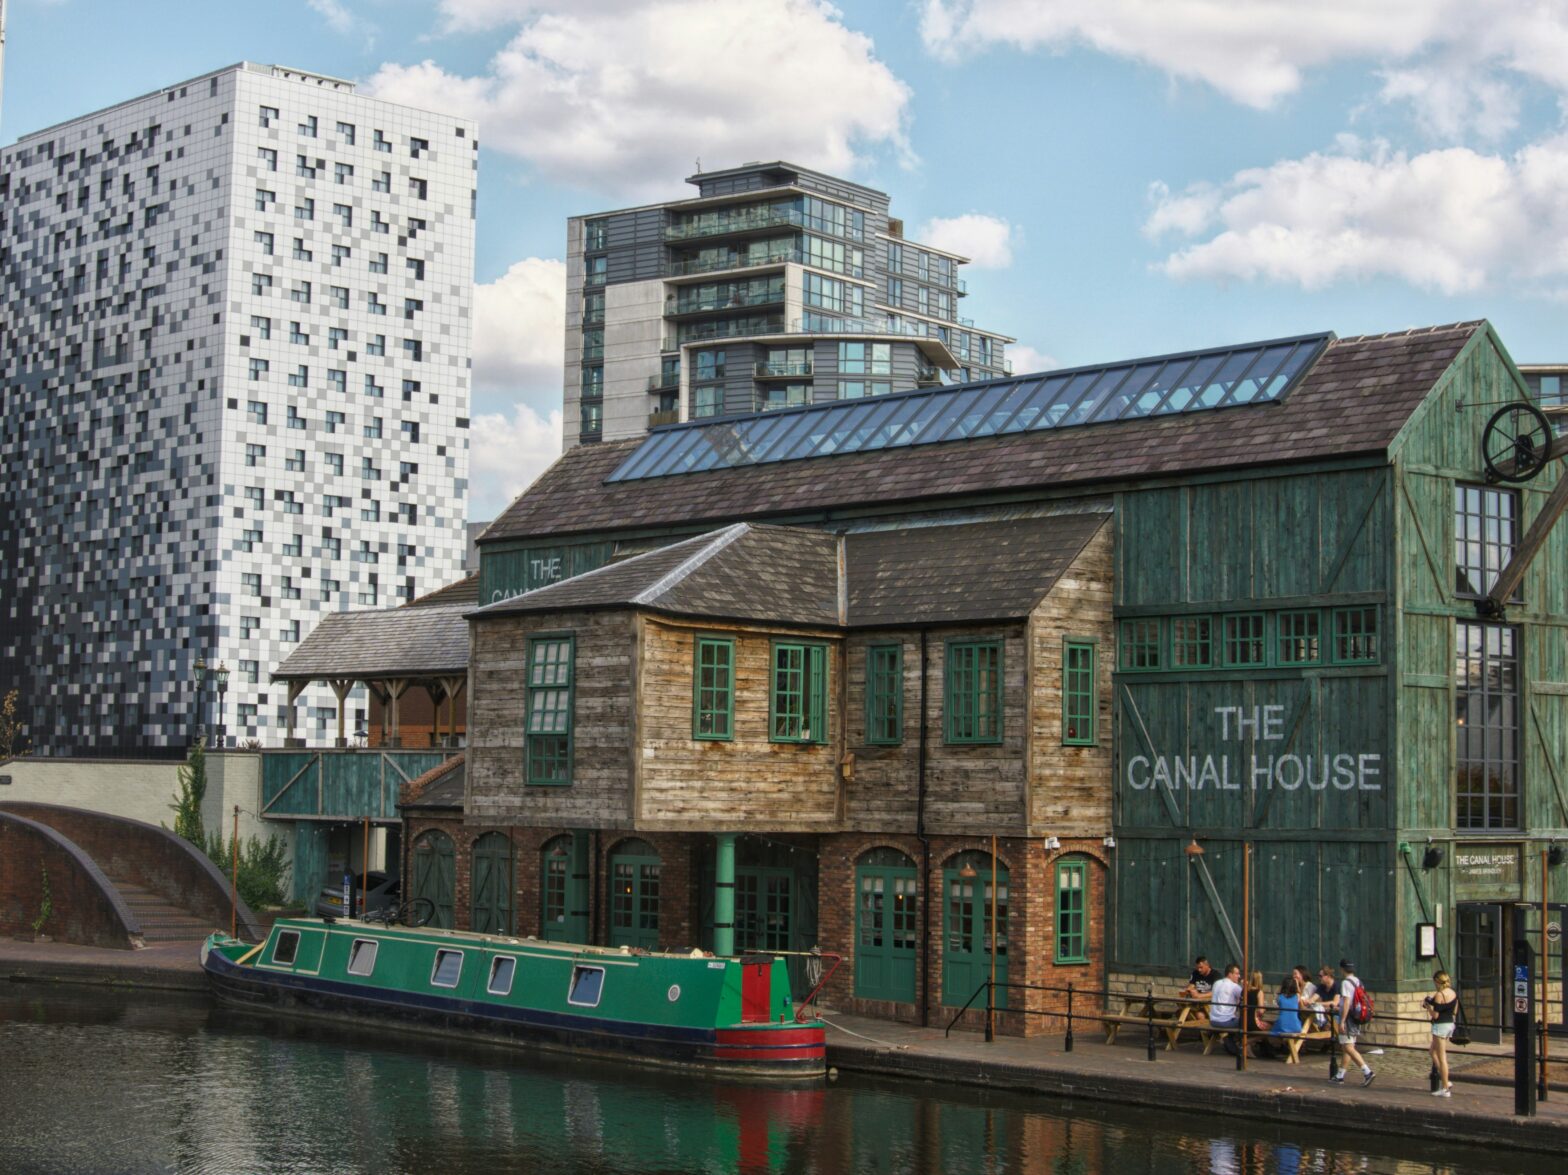 5 Reasons To Explore The Birmingham Canals Near London